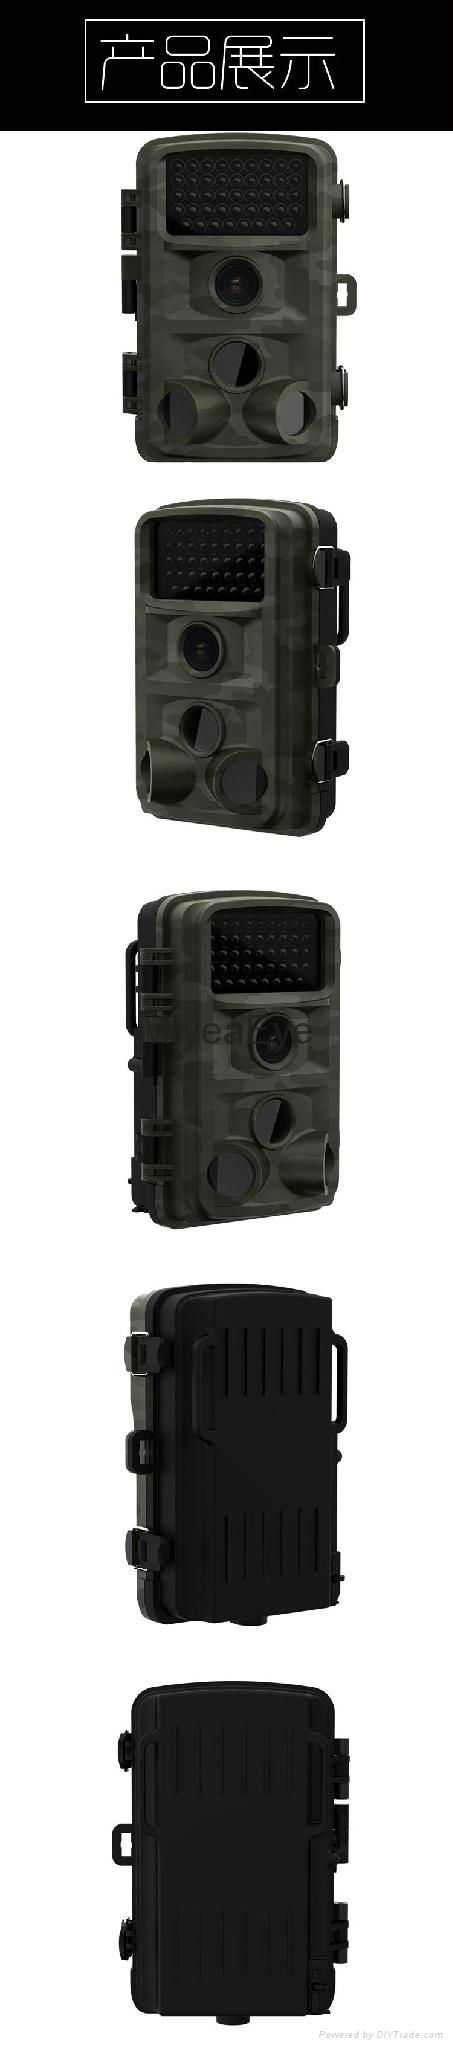 1080P HD 120 Degrees Detection Angle Outdoor Digital Hunting Trail Camera 